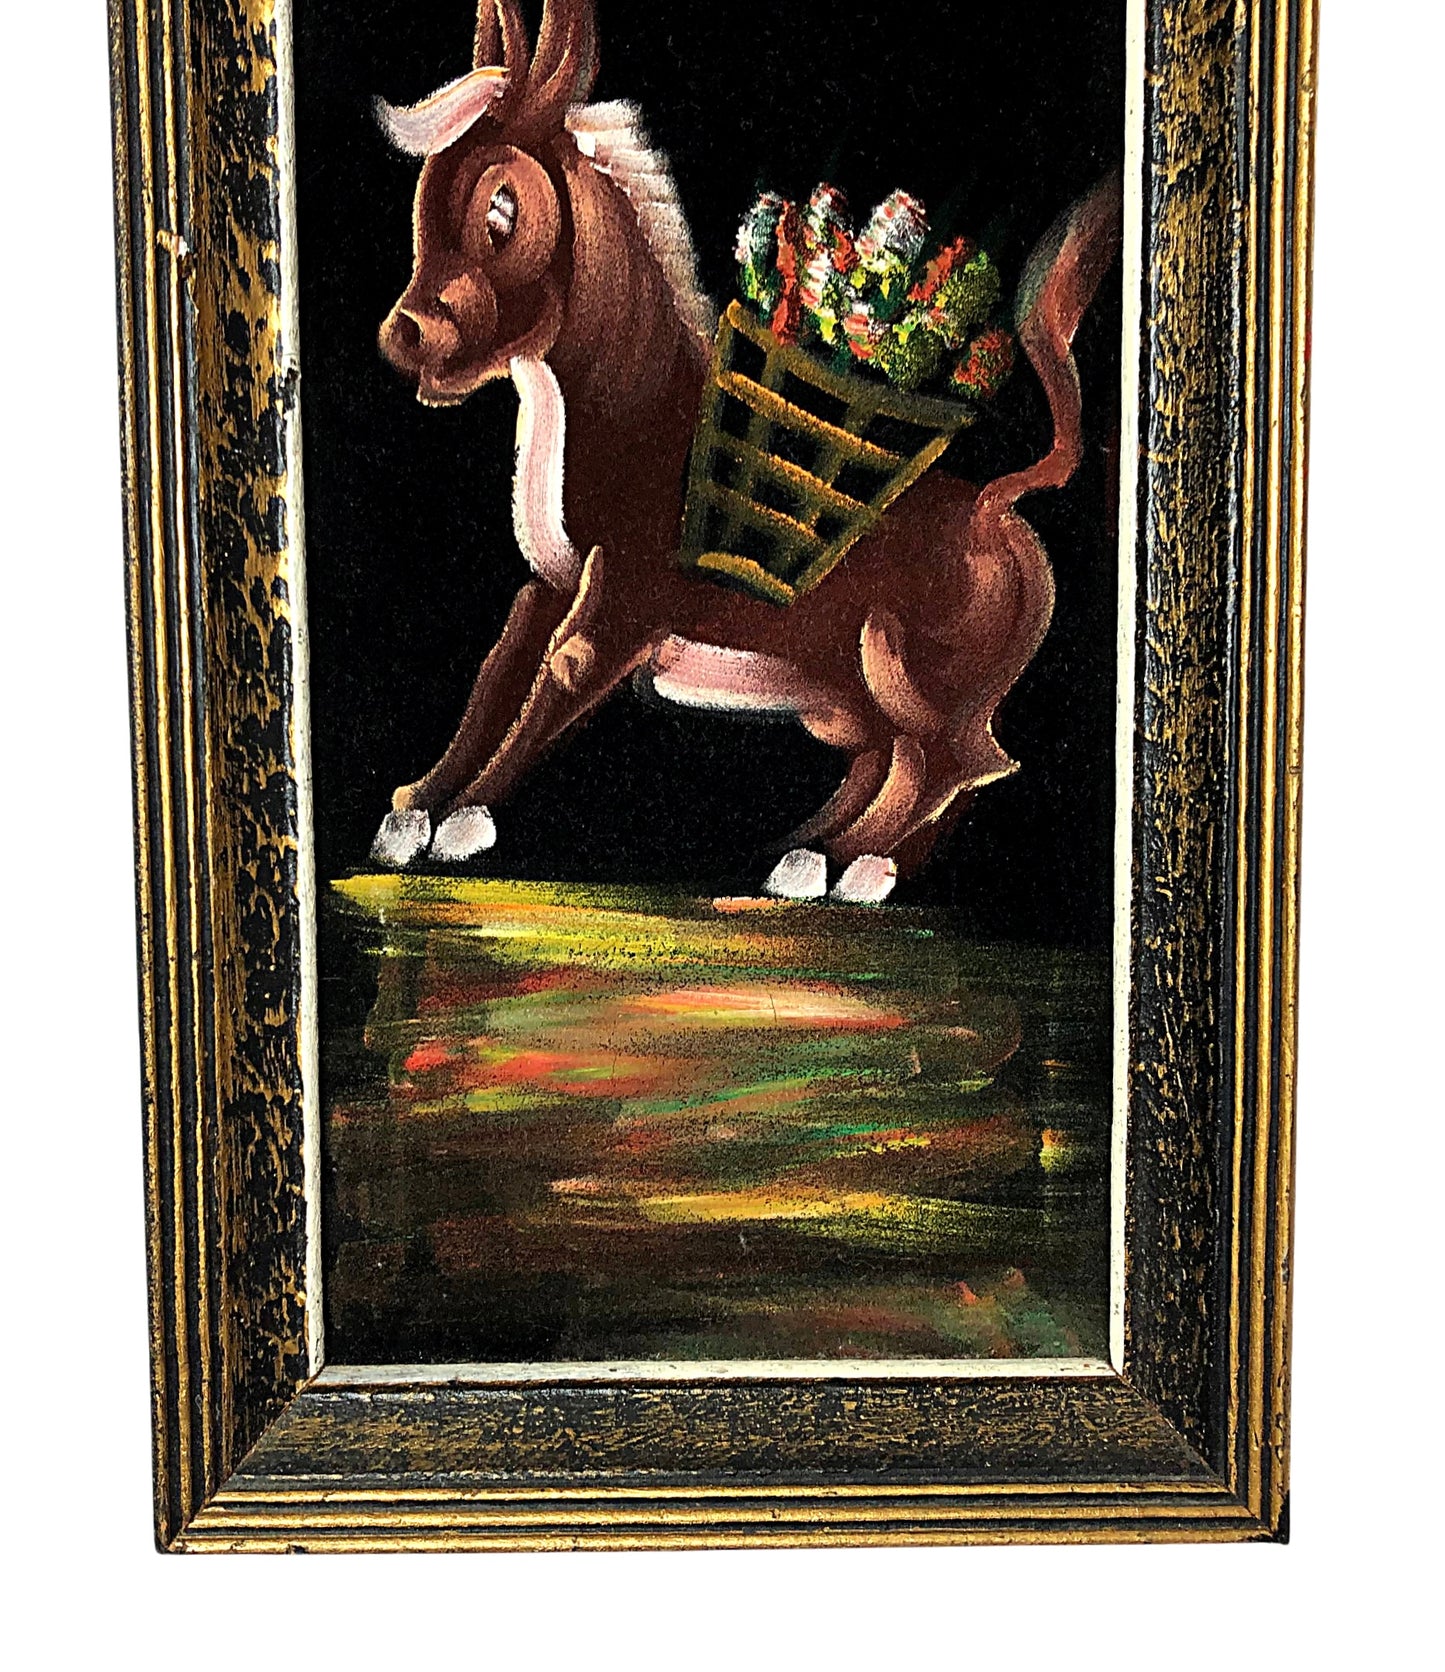 60’s Velvet Donkey Painting Dominick the Christmas Donkey Stretched Canvas Art Print 18” x 10”